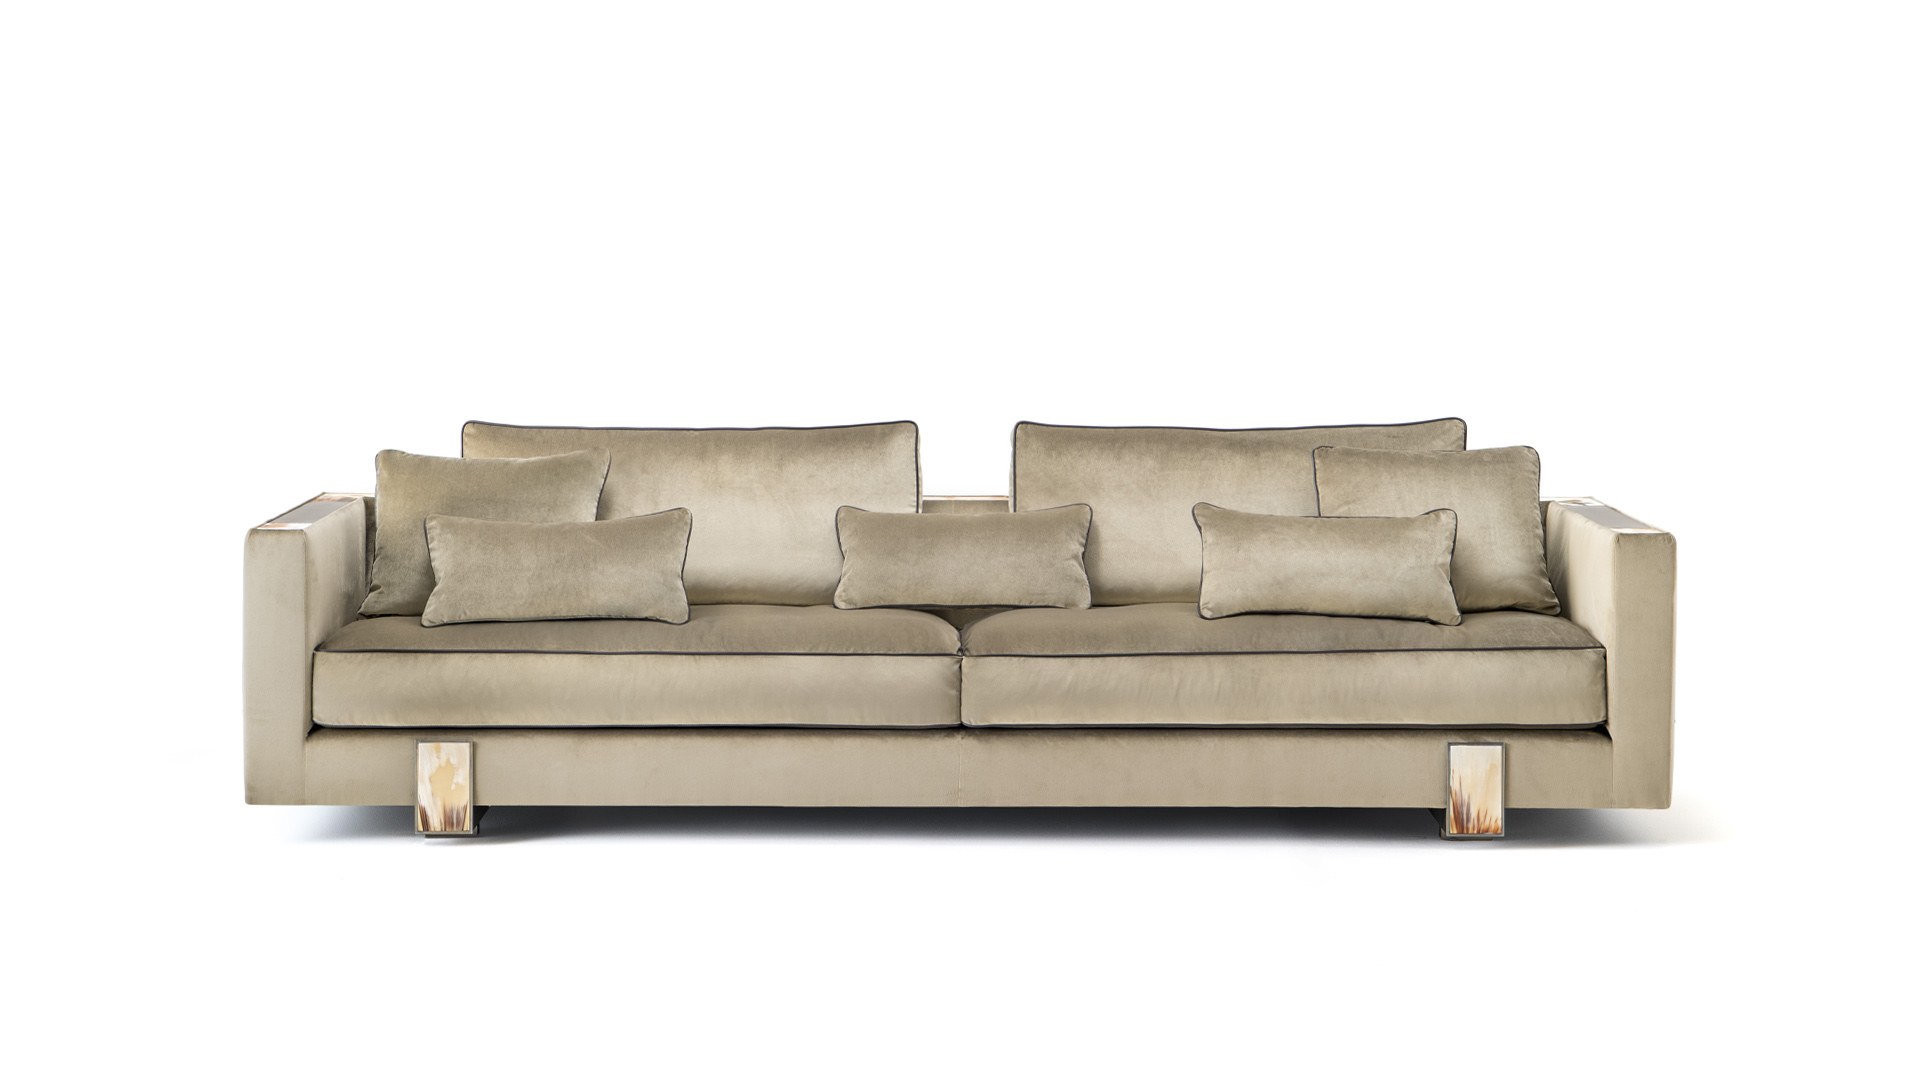 Sofas and seats - Adriano sofa in Lario velvet with horn details mod. 6035D - cover - Arcahorn